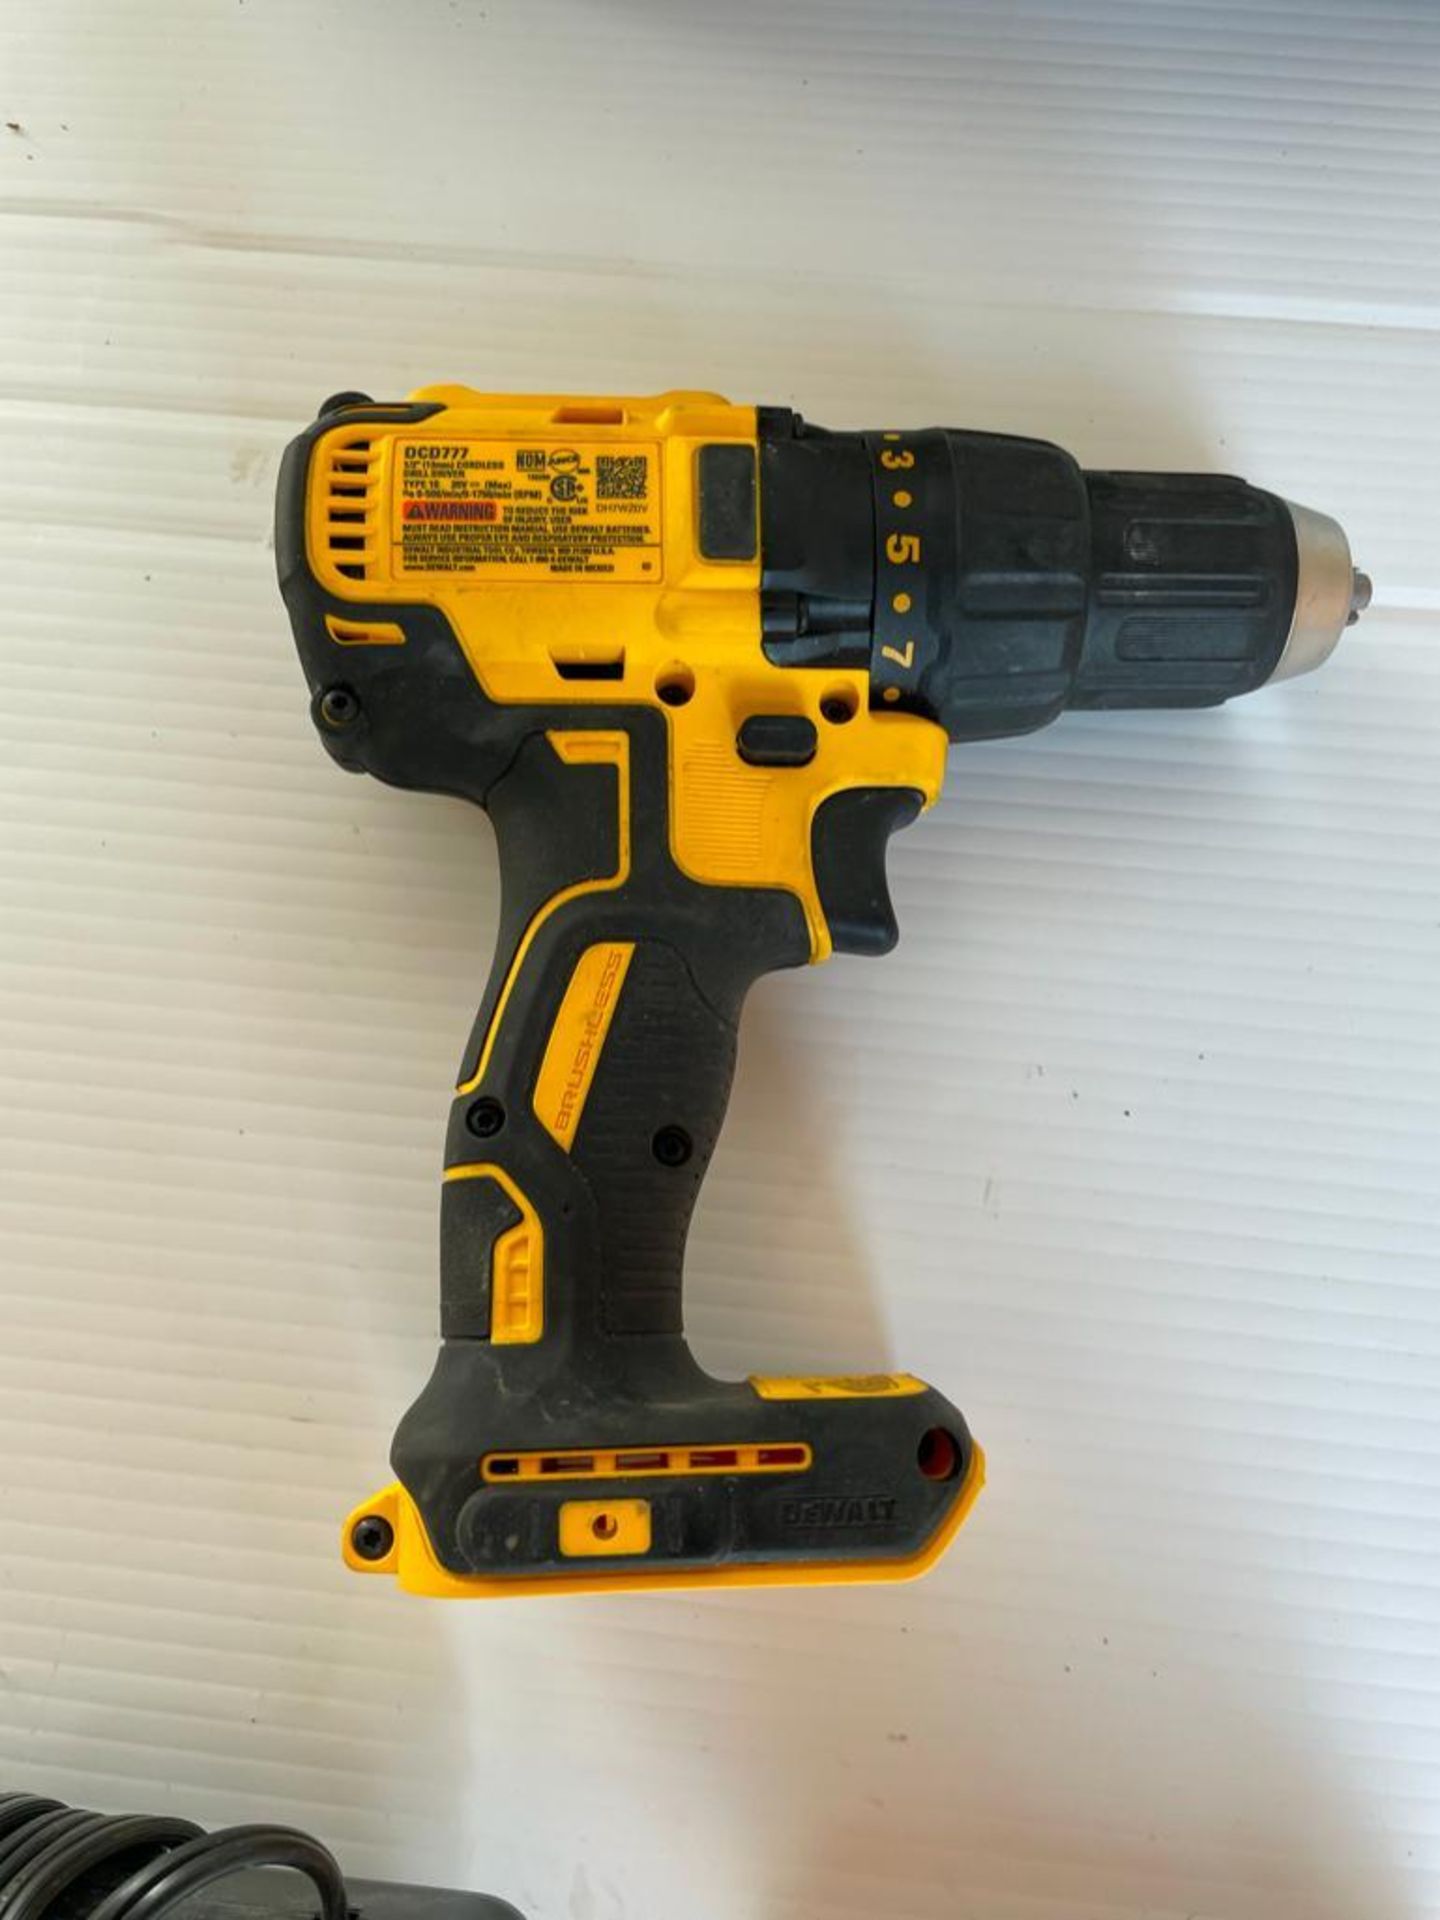 DeWalt DCD777 Cordless Drill Driver 1/2" with Battery, Charger & Case. Located in Hazelwood, MO - Image 5 of 8